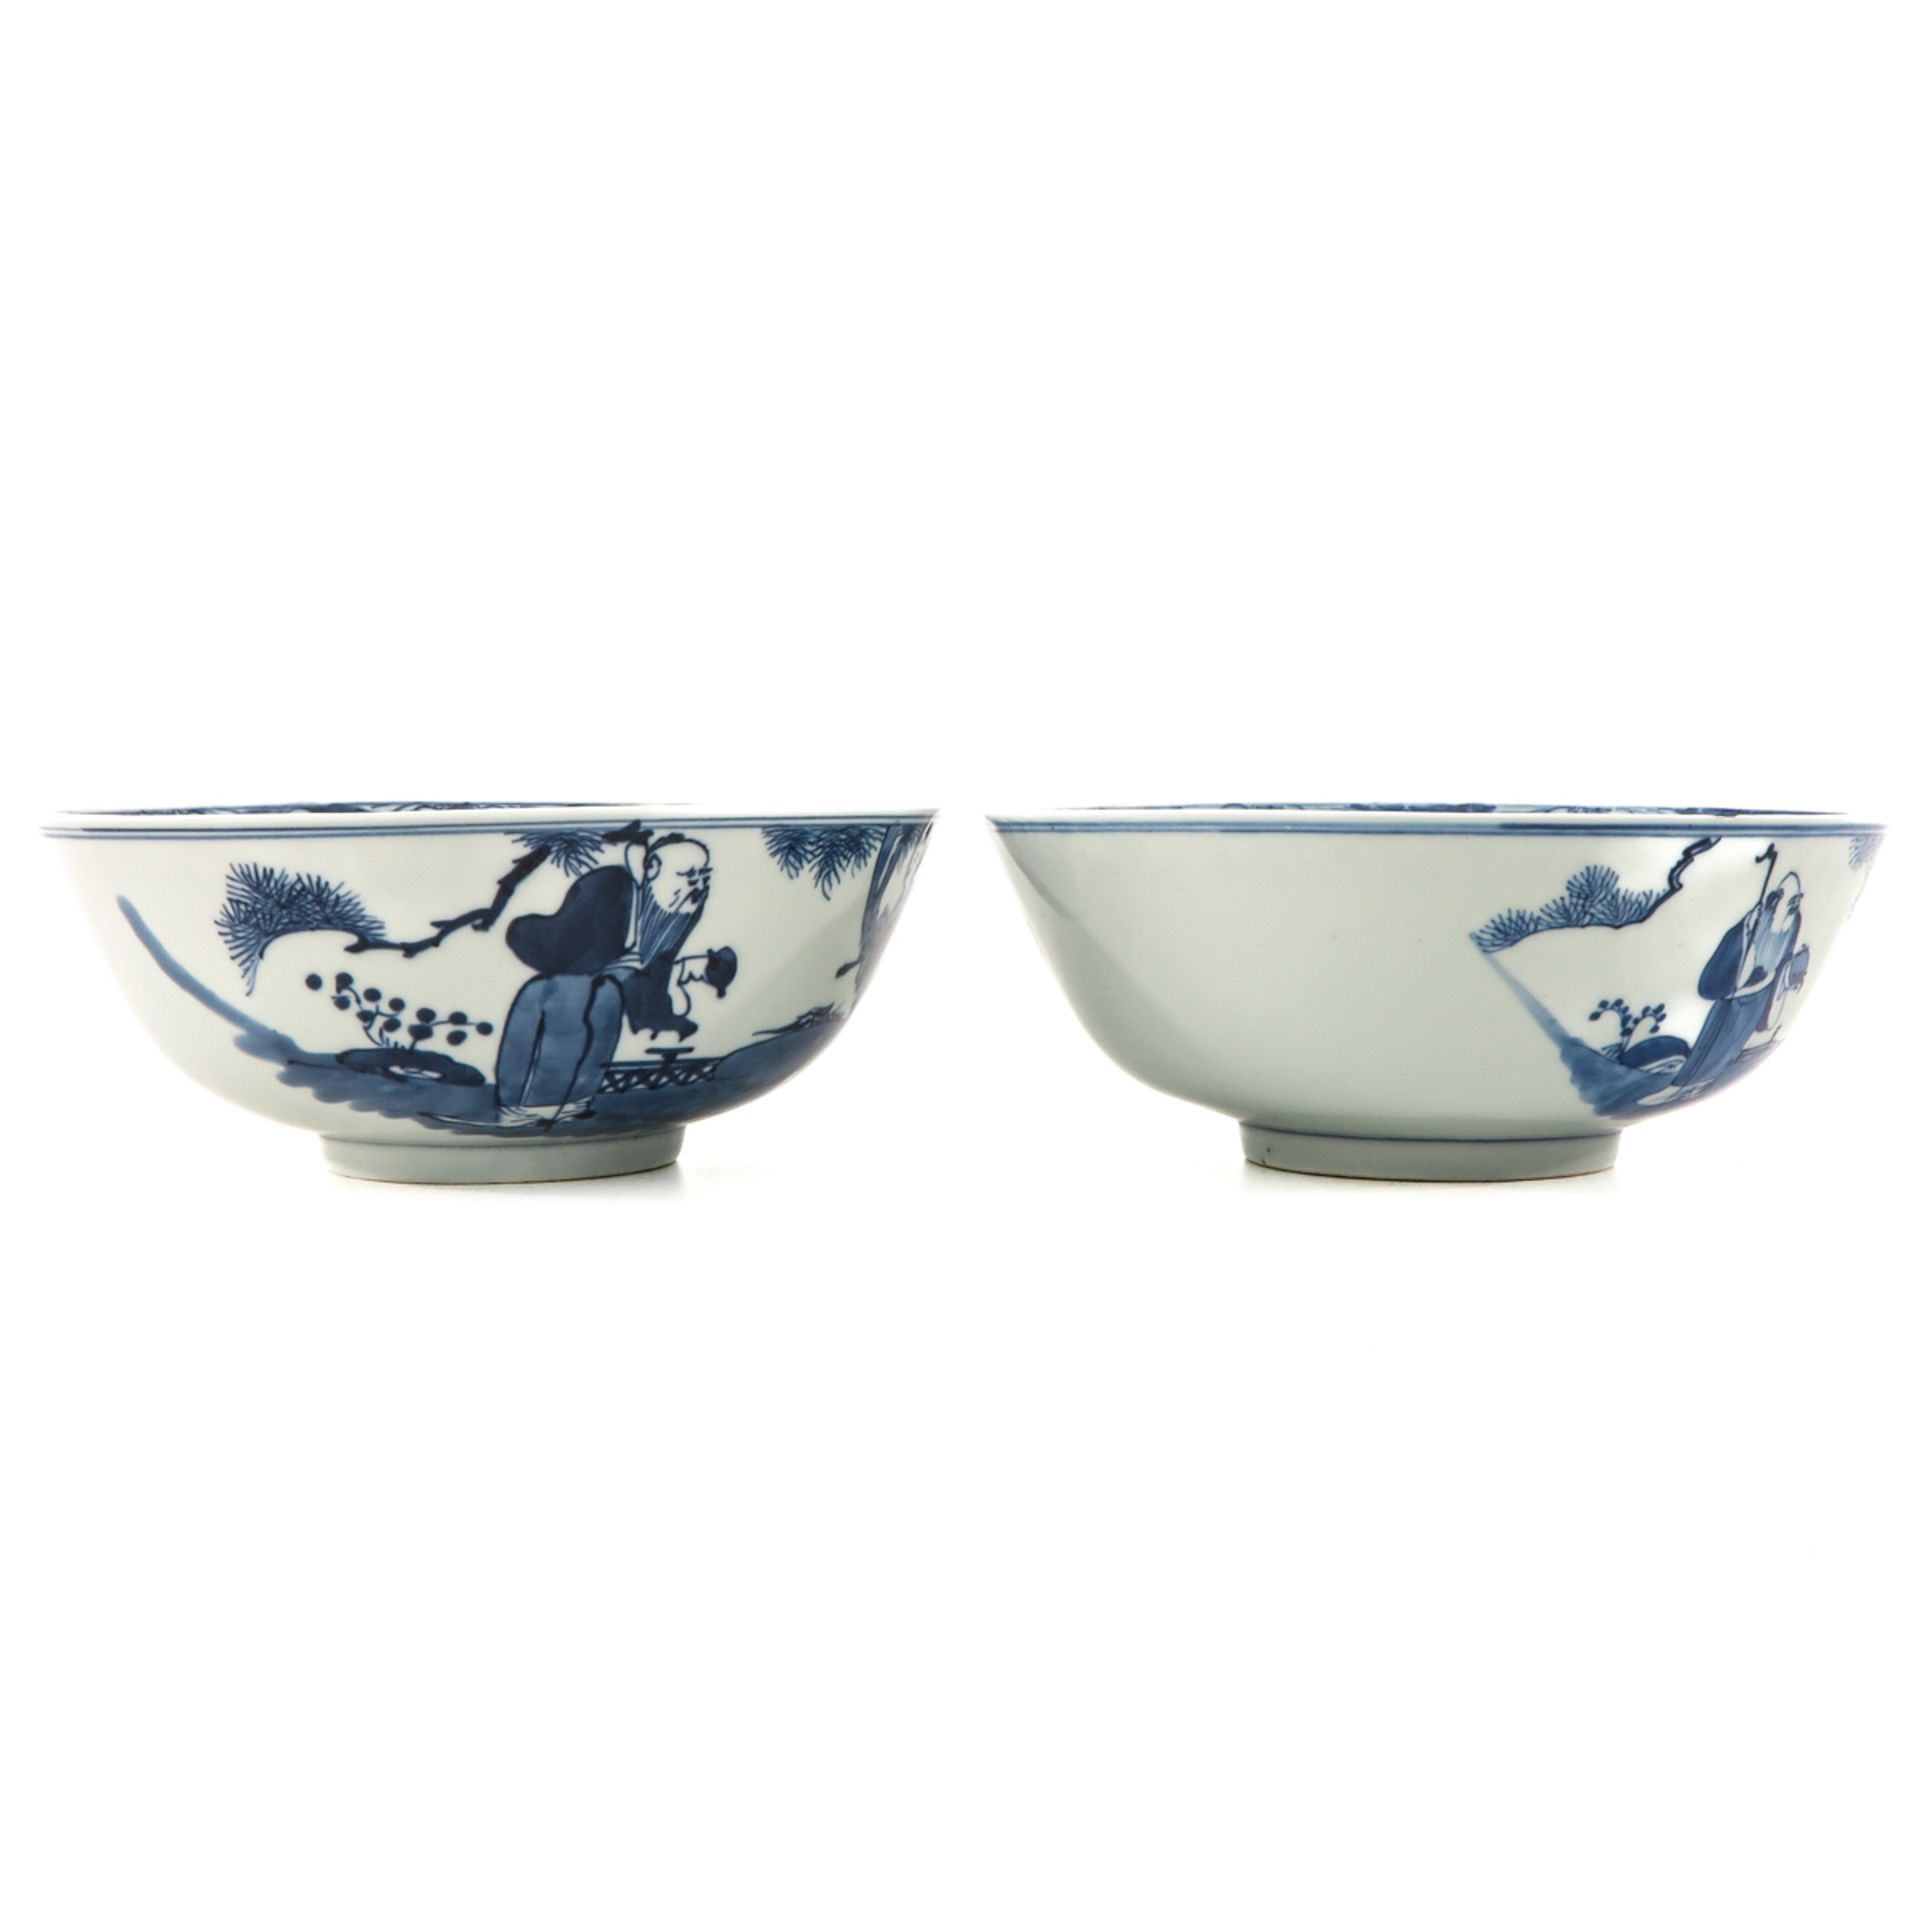 A Lot of 2 Blue and White Bowls - Image 4 of 10